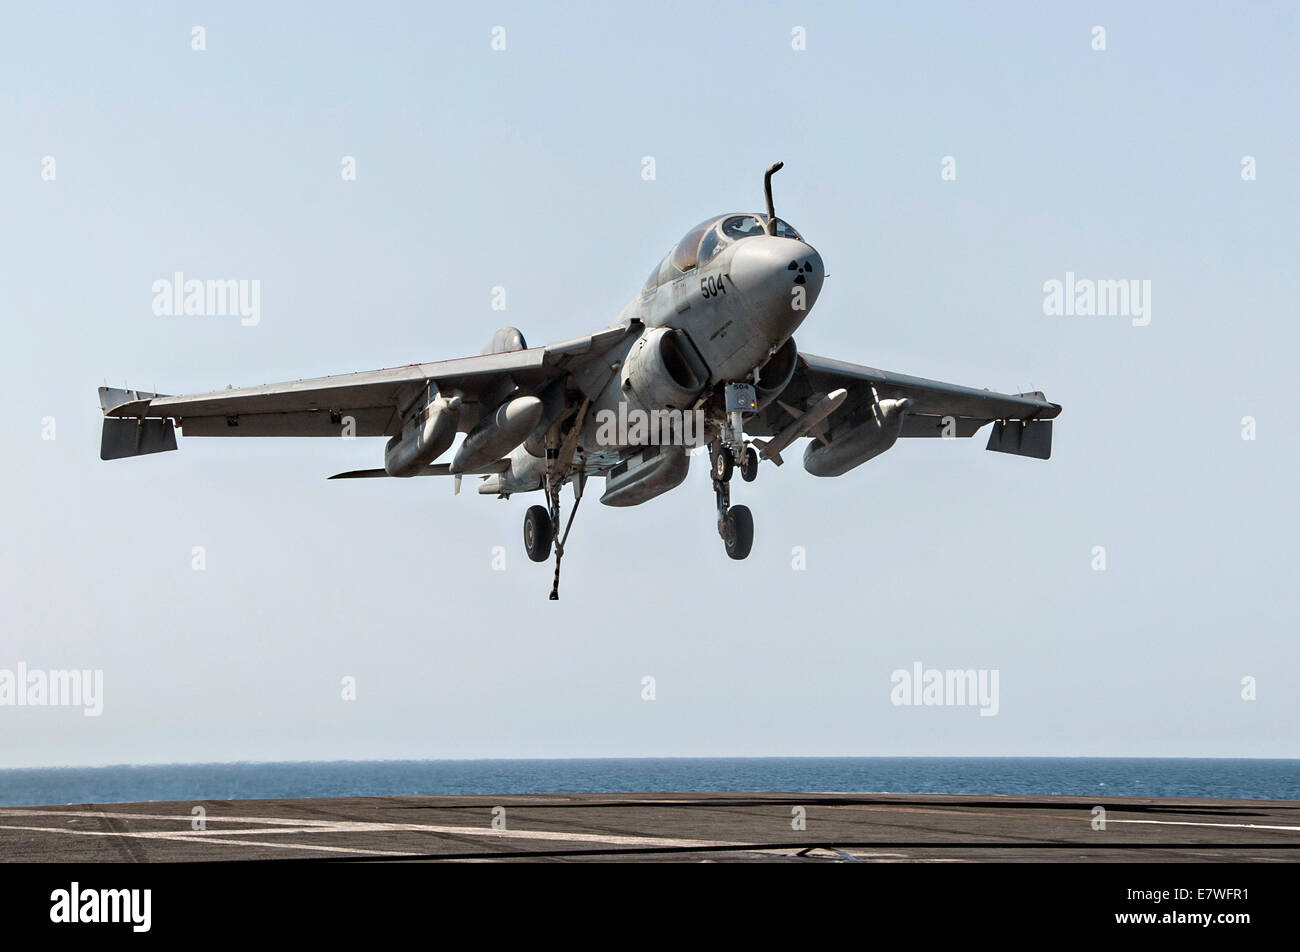 A US Navy EA-6B Prowler electronic attack aircraft lands on the flight deck of the aircraft carrier USS George H.W. Bush after returning from a combat sortie against ISIS targets September 23, 2014 in the Persian Gulf. The military launched the first direct strikes on ISIS targets inside Syria. Stock Photo